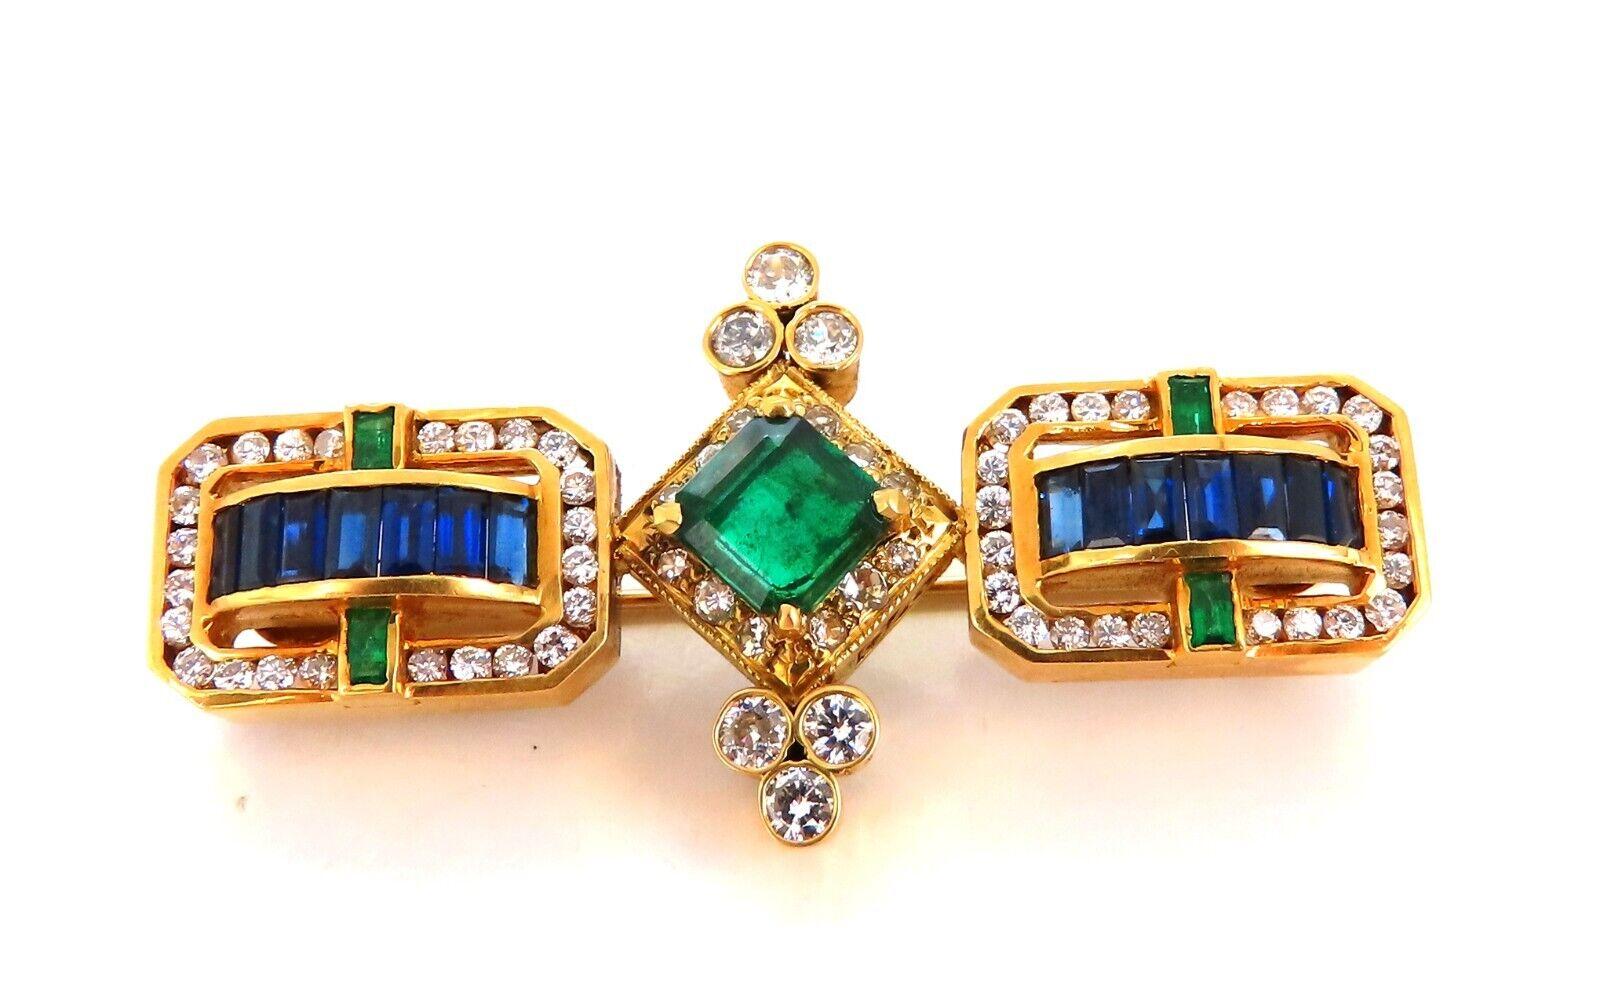 Rare Handmade Emerald sapphire ring

Very Well Made

1.50ct Natural Center Emerald

7 x 7.2mm

1.55ct natural baguette sapphires

2.00ct natural diamonds

H-color Vs-2 Clarity

2 x 1 inch diameter

Handmade 

18kt. yellow gold 

20.6 Grams.

$14000